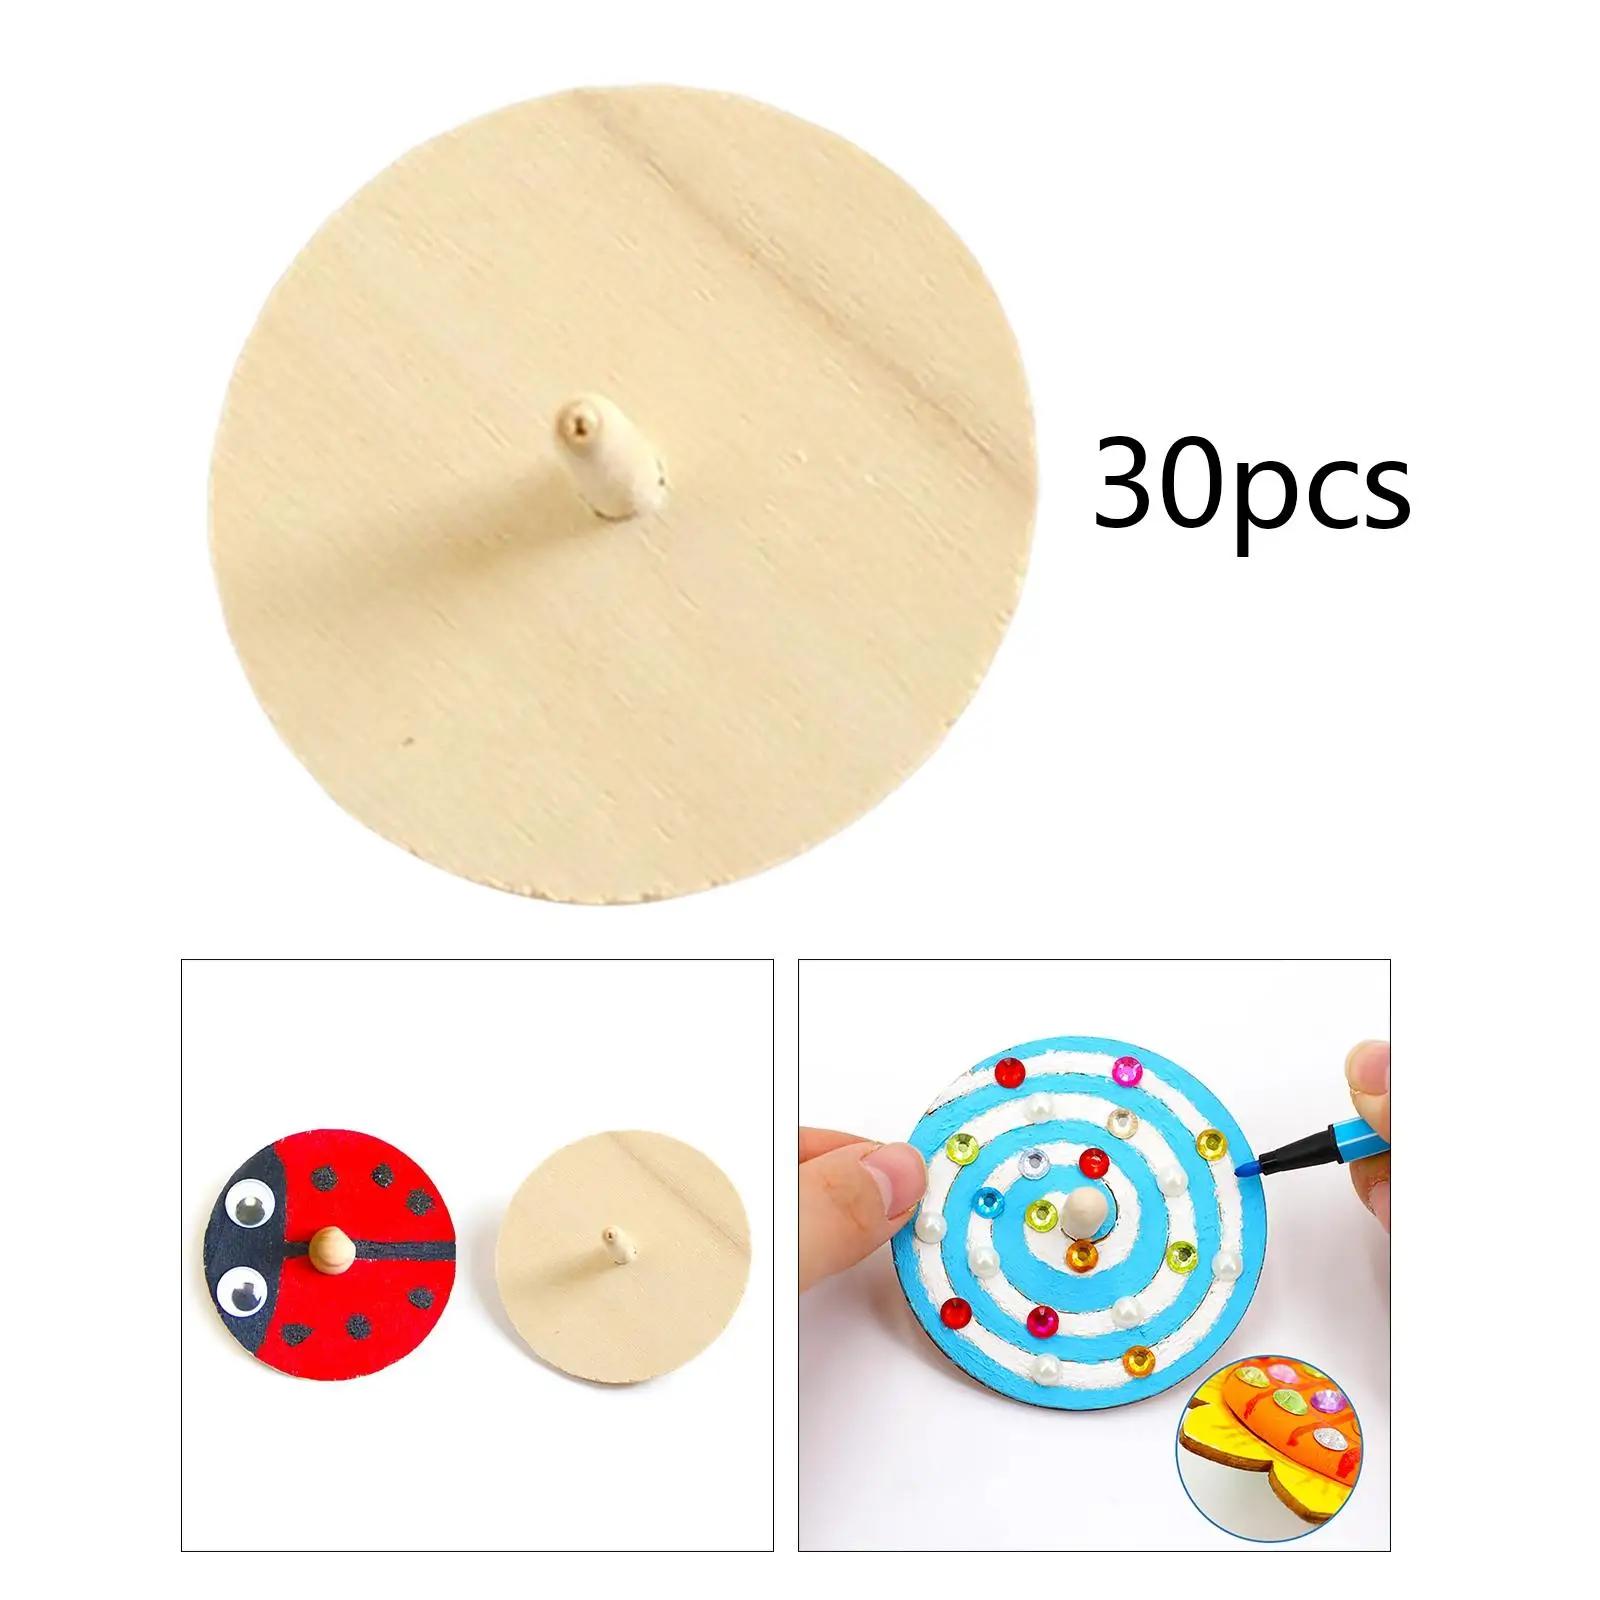 30Pcs Unfinished Wooden Spinner Top Gyro Toys Kids Handmade Peg Tops Classic Balance Toy Painting DIY Art for Toddlers Children